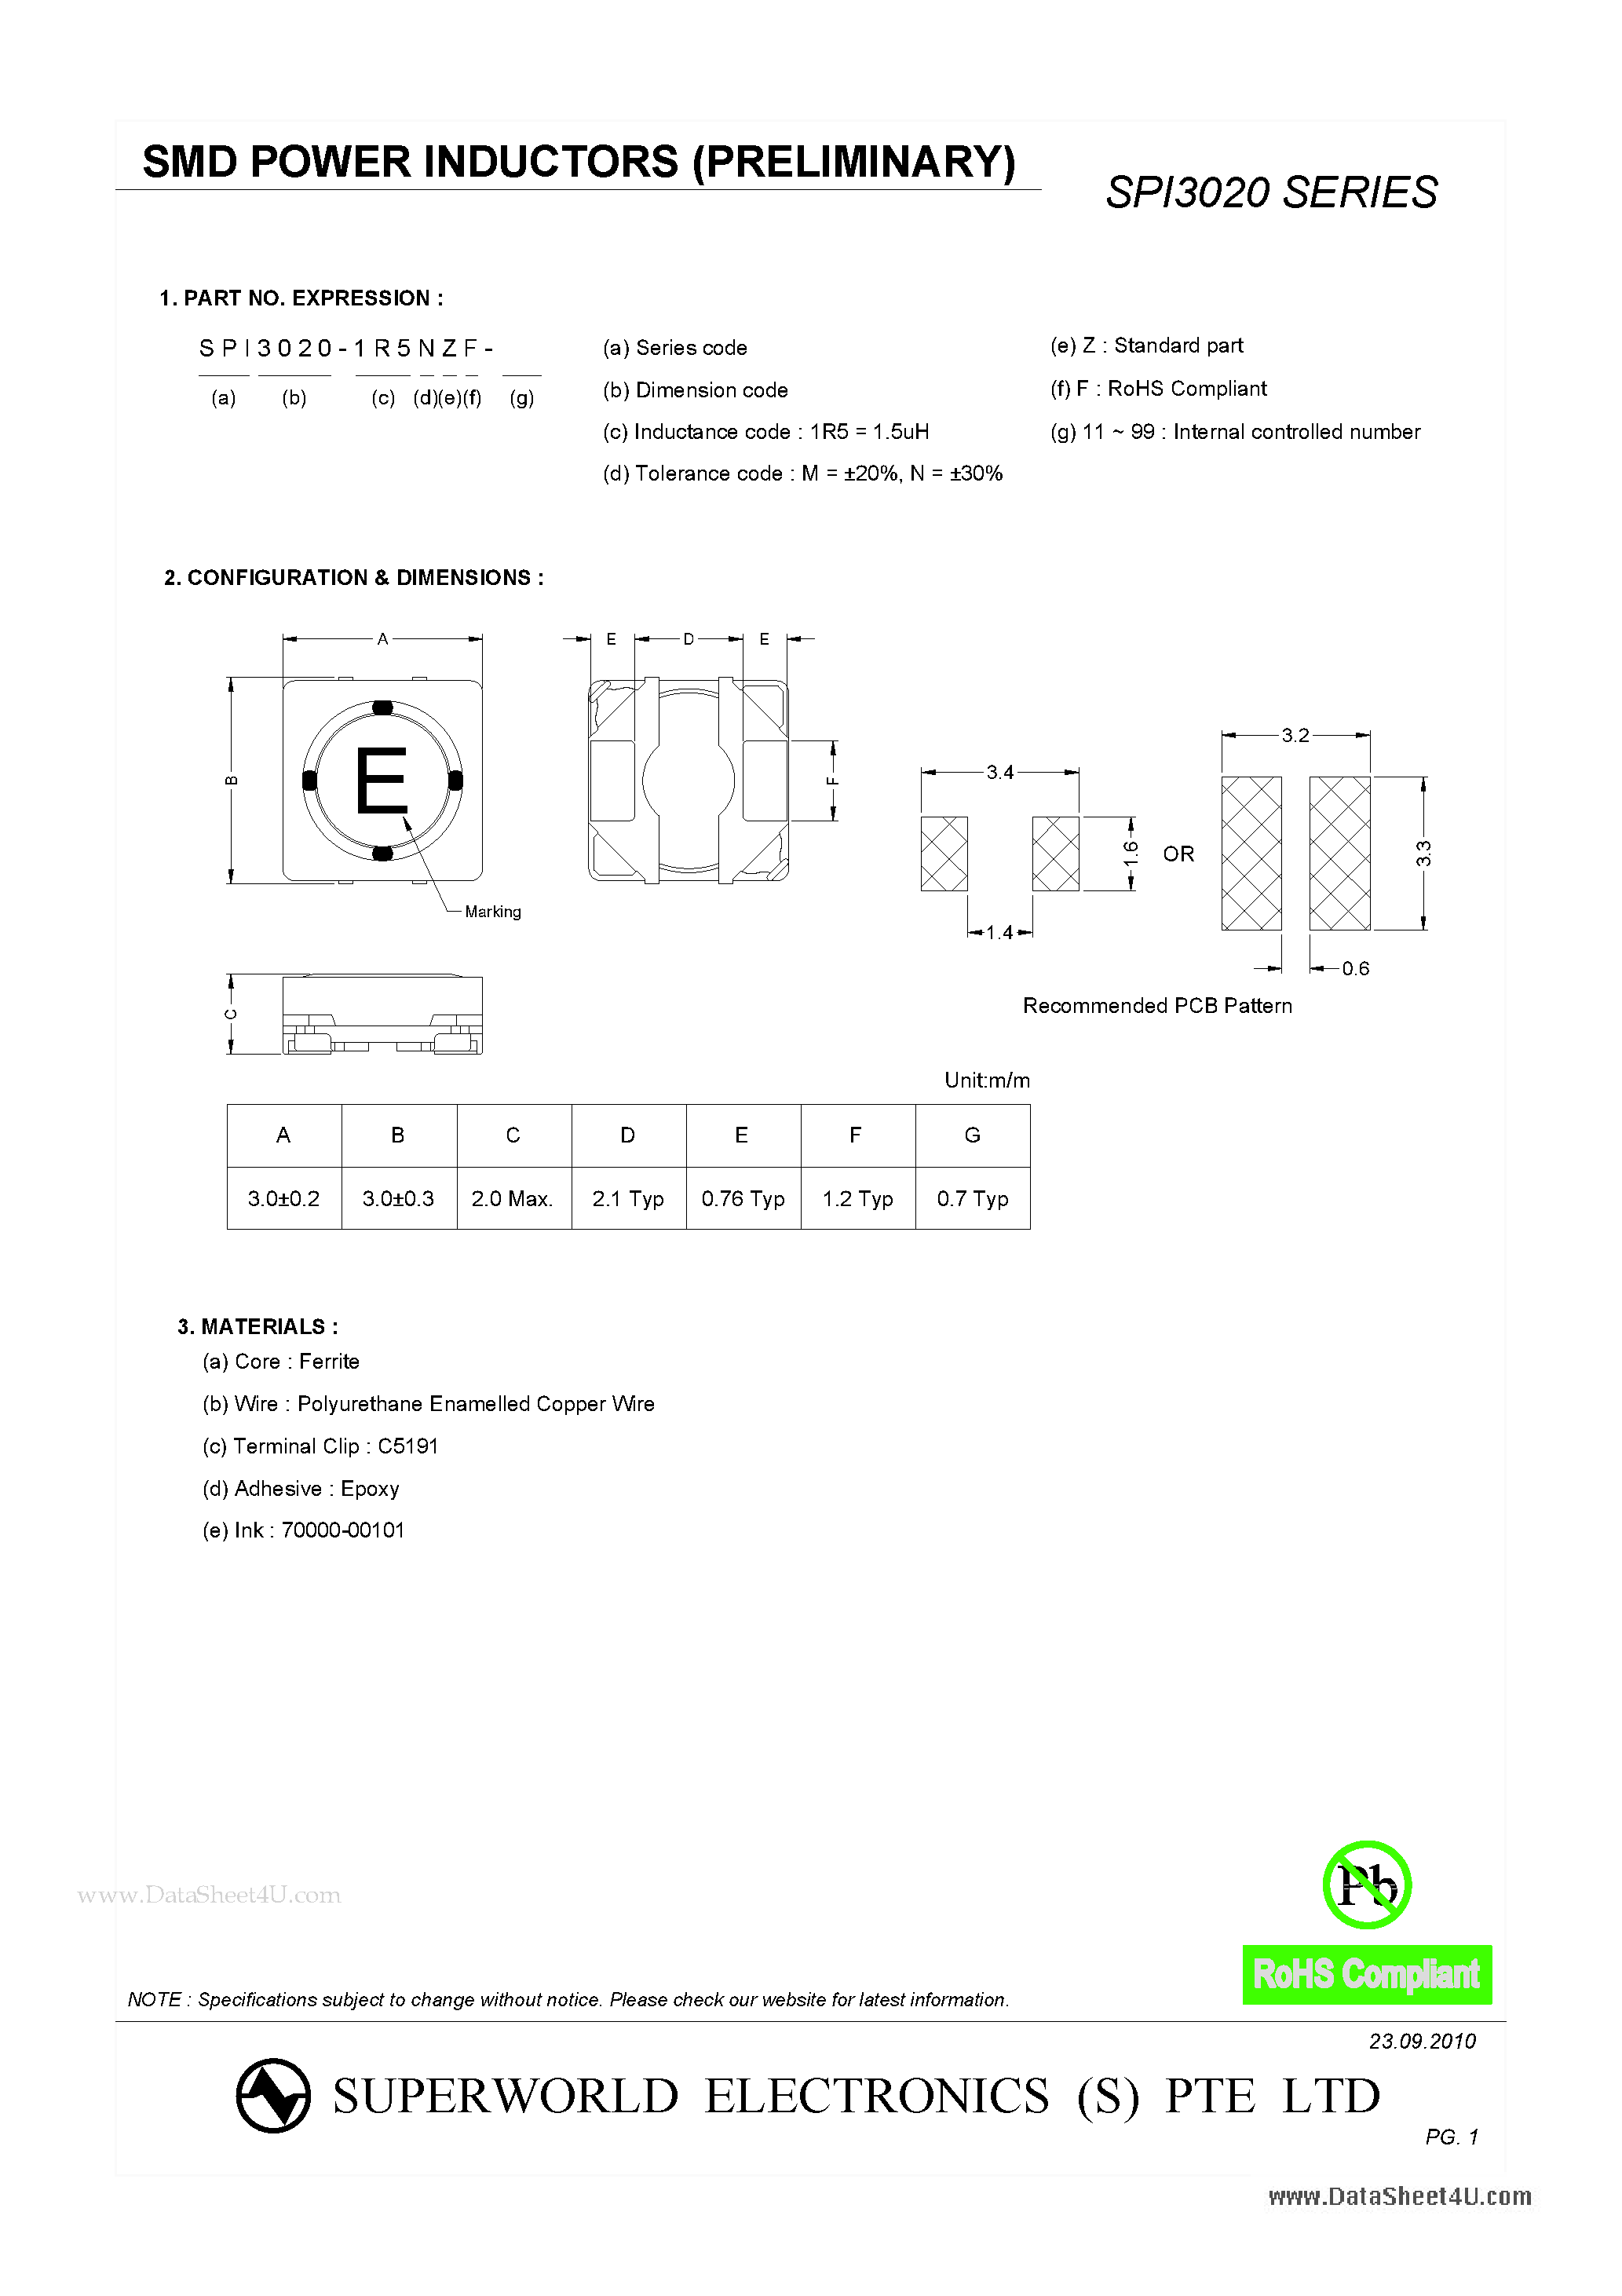 Datasheet SPI3020 - SMD POWER INDUCTORS page 1